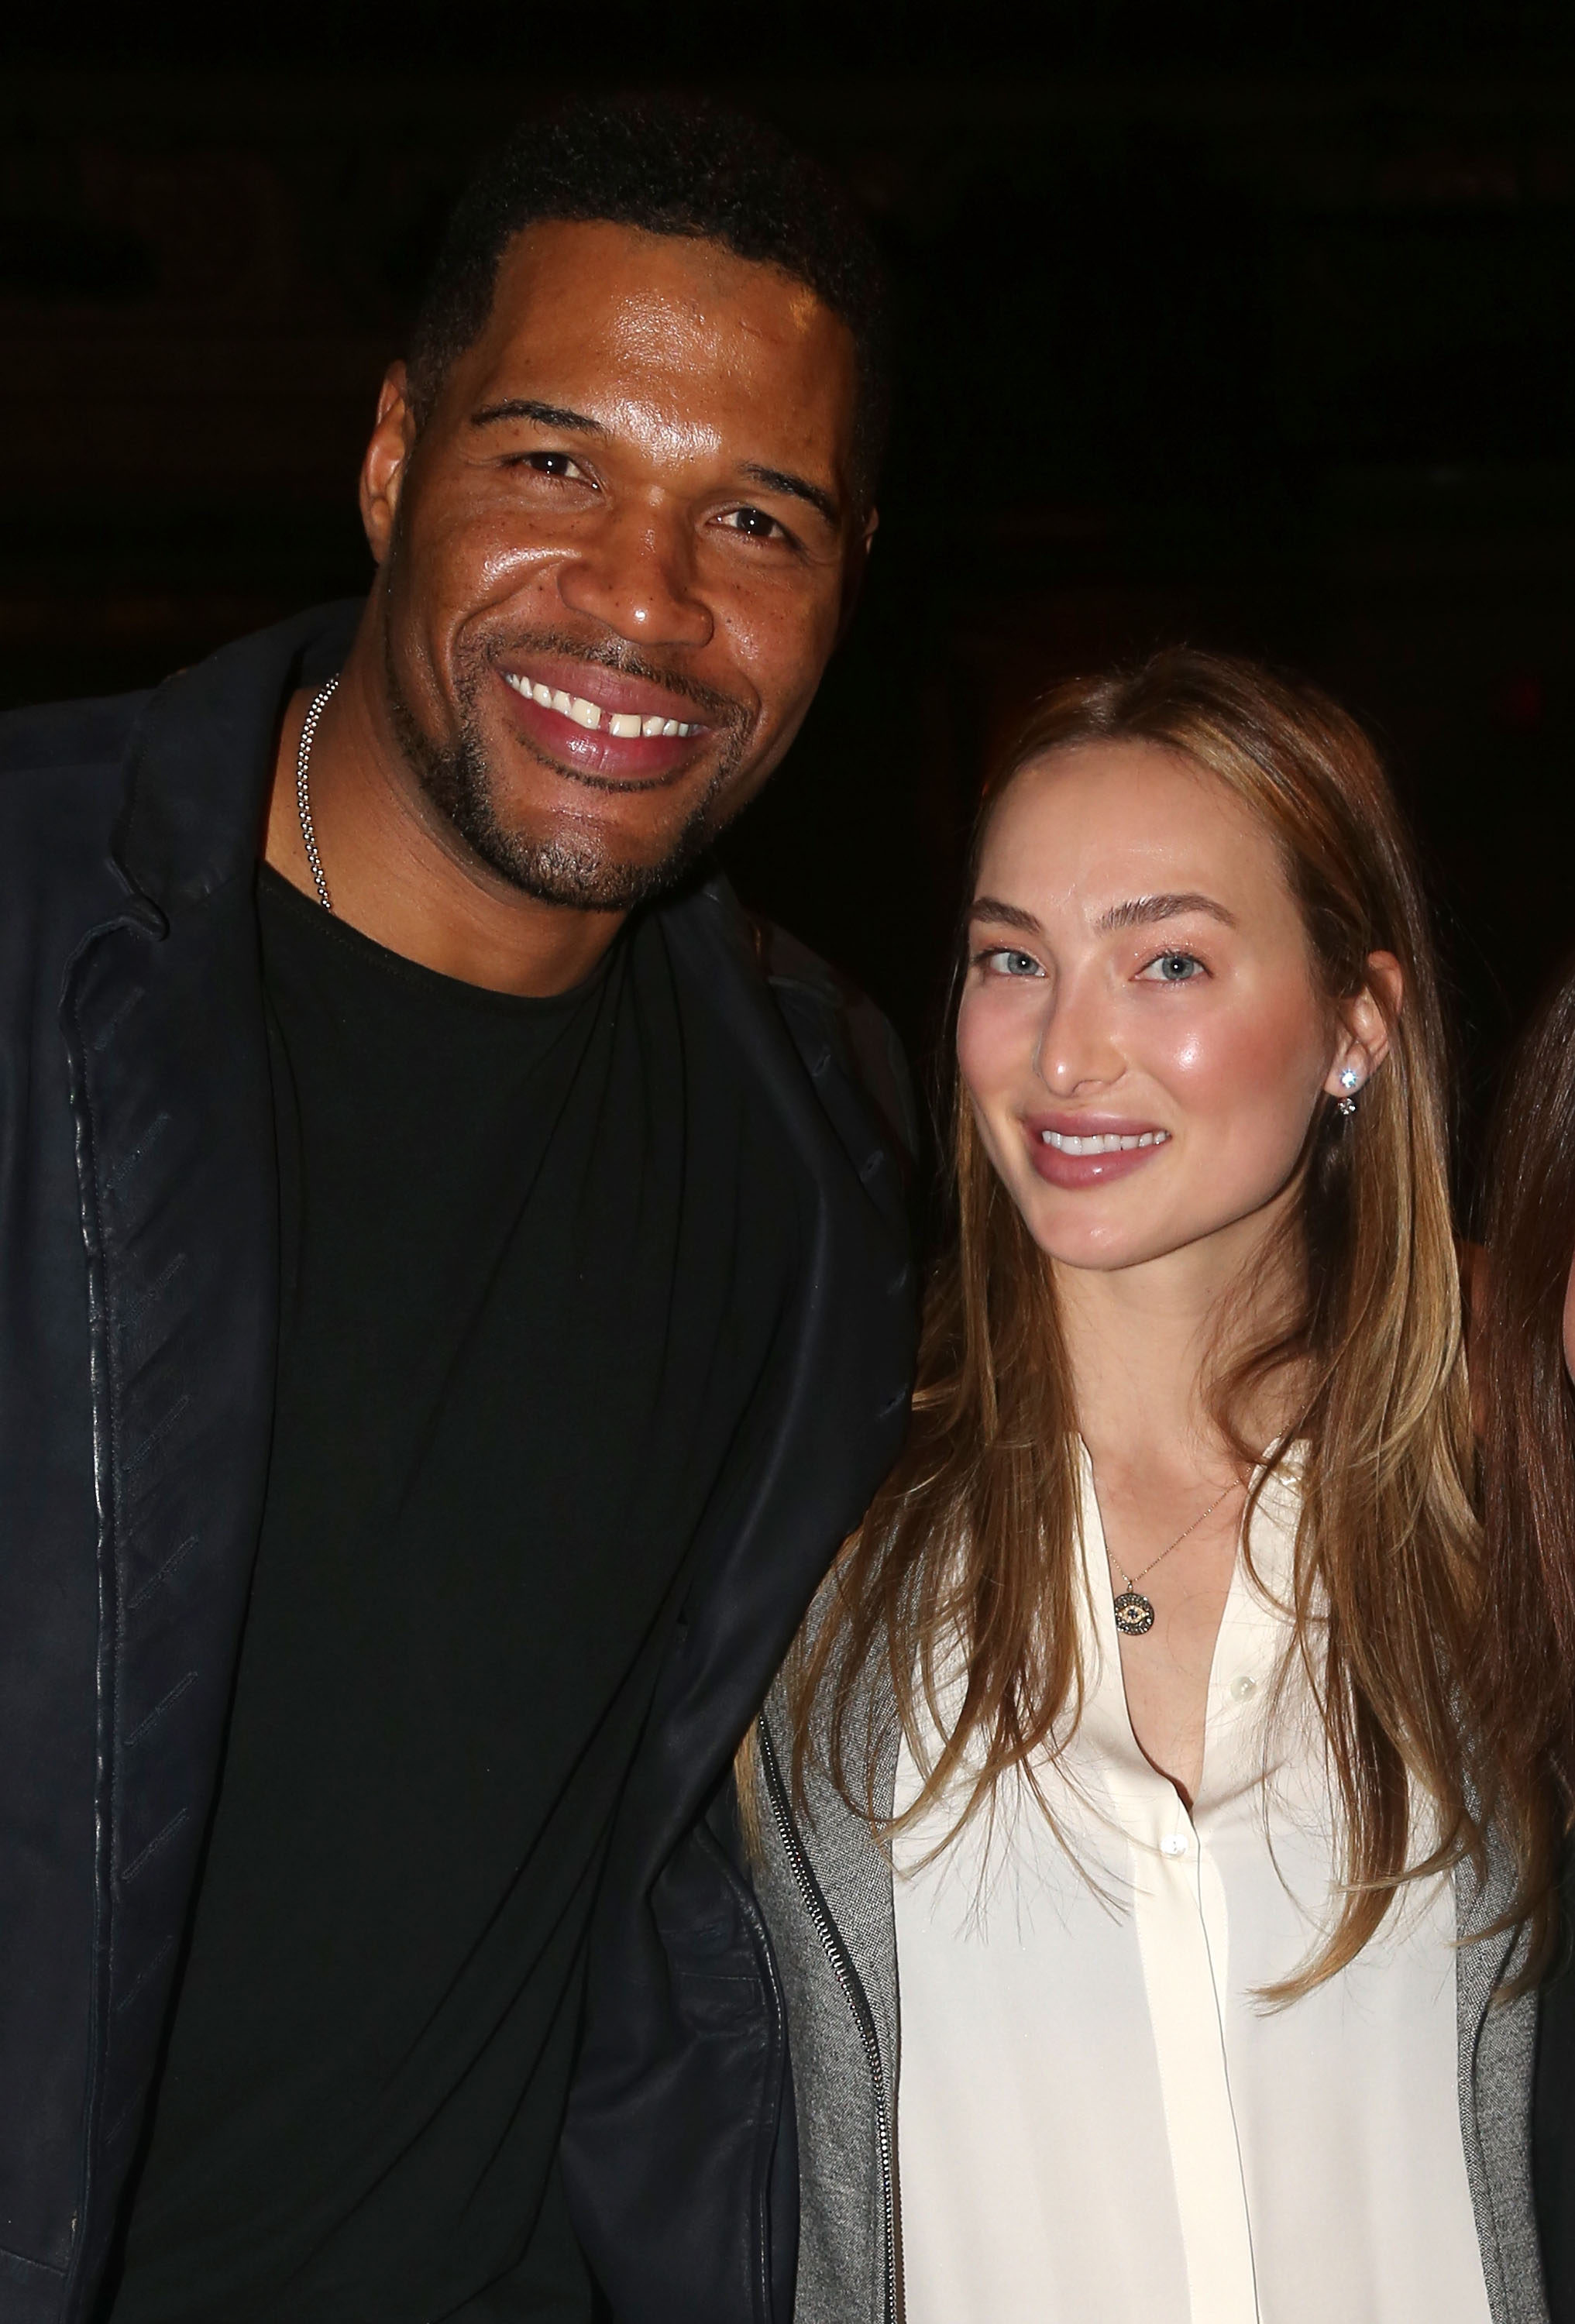 Michael Strahan and Kayla Quick attend the hit Broadway musical "Kinky Boots" in New York City on March 23, 2016 | Source: Getty Images